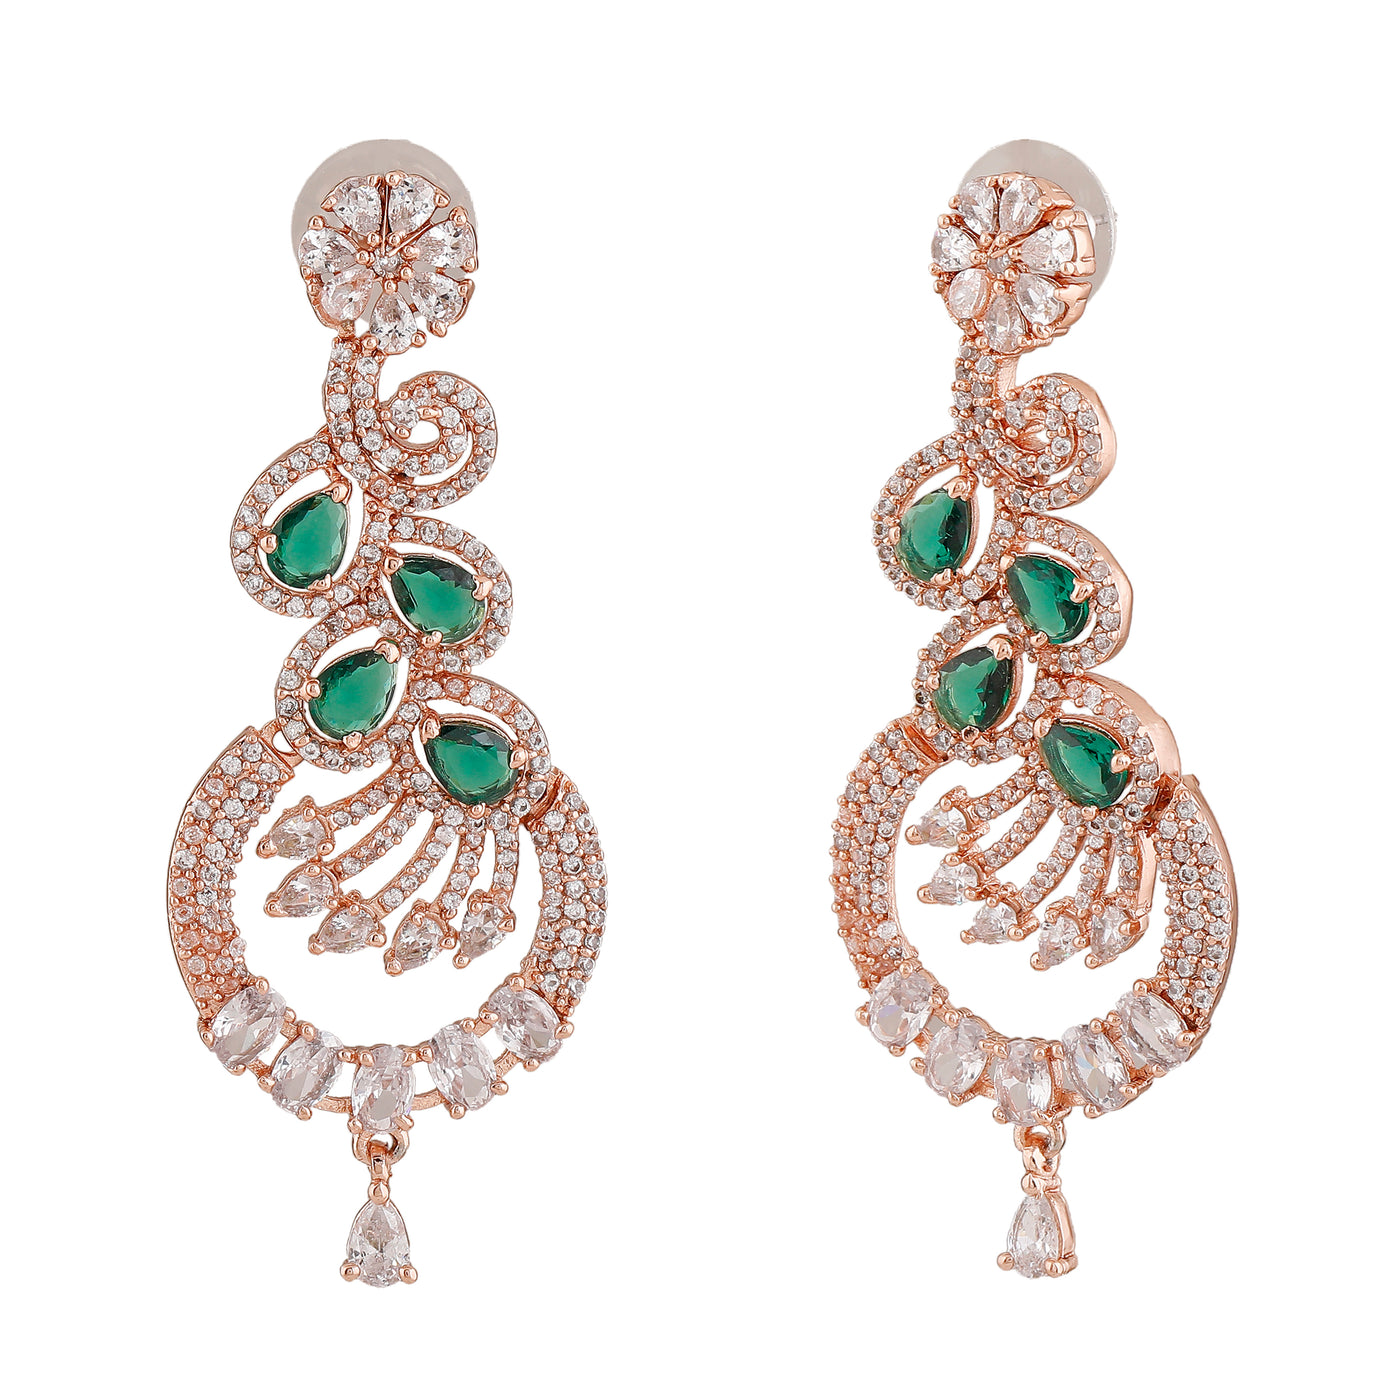 Estele Rose Gold Plated CZ Scintillating Earrings with Emerald Crystals for Women